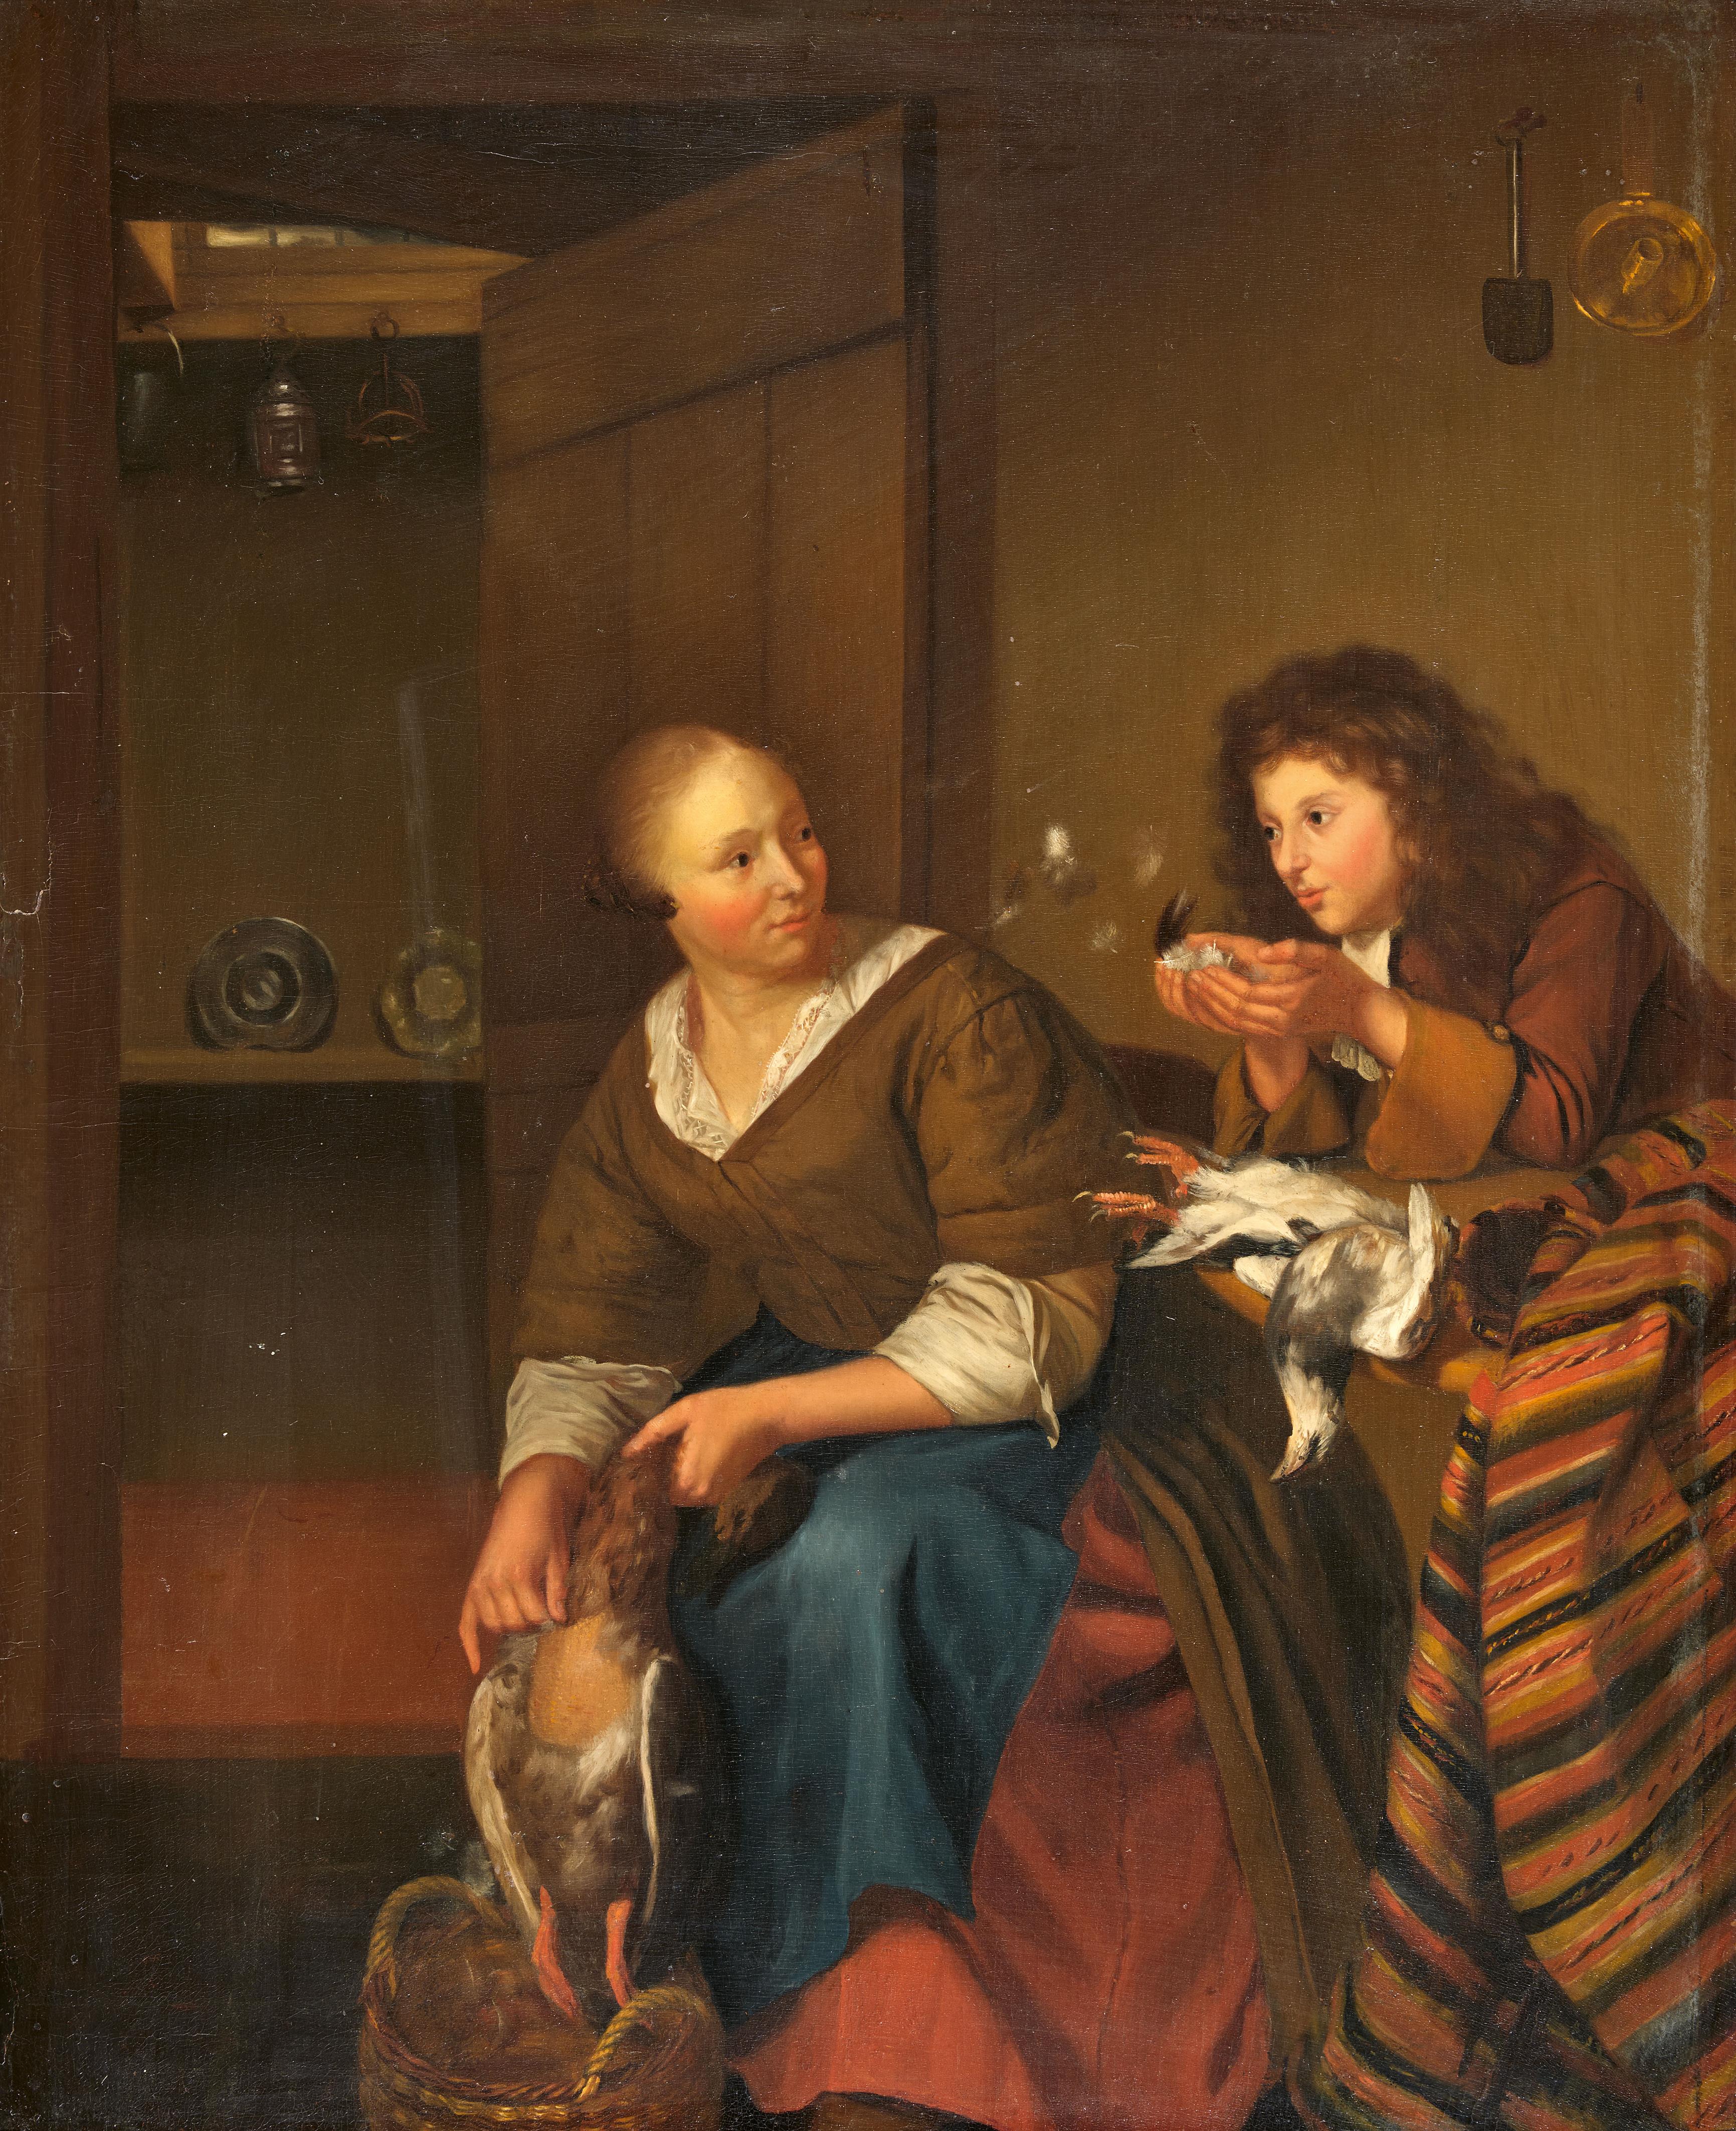 Willem van Mieris, circle of - Interior with a Maid Plucking a Goose and a Boy - image-1